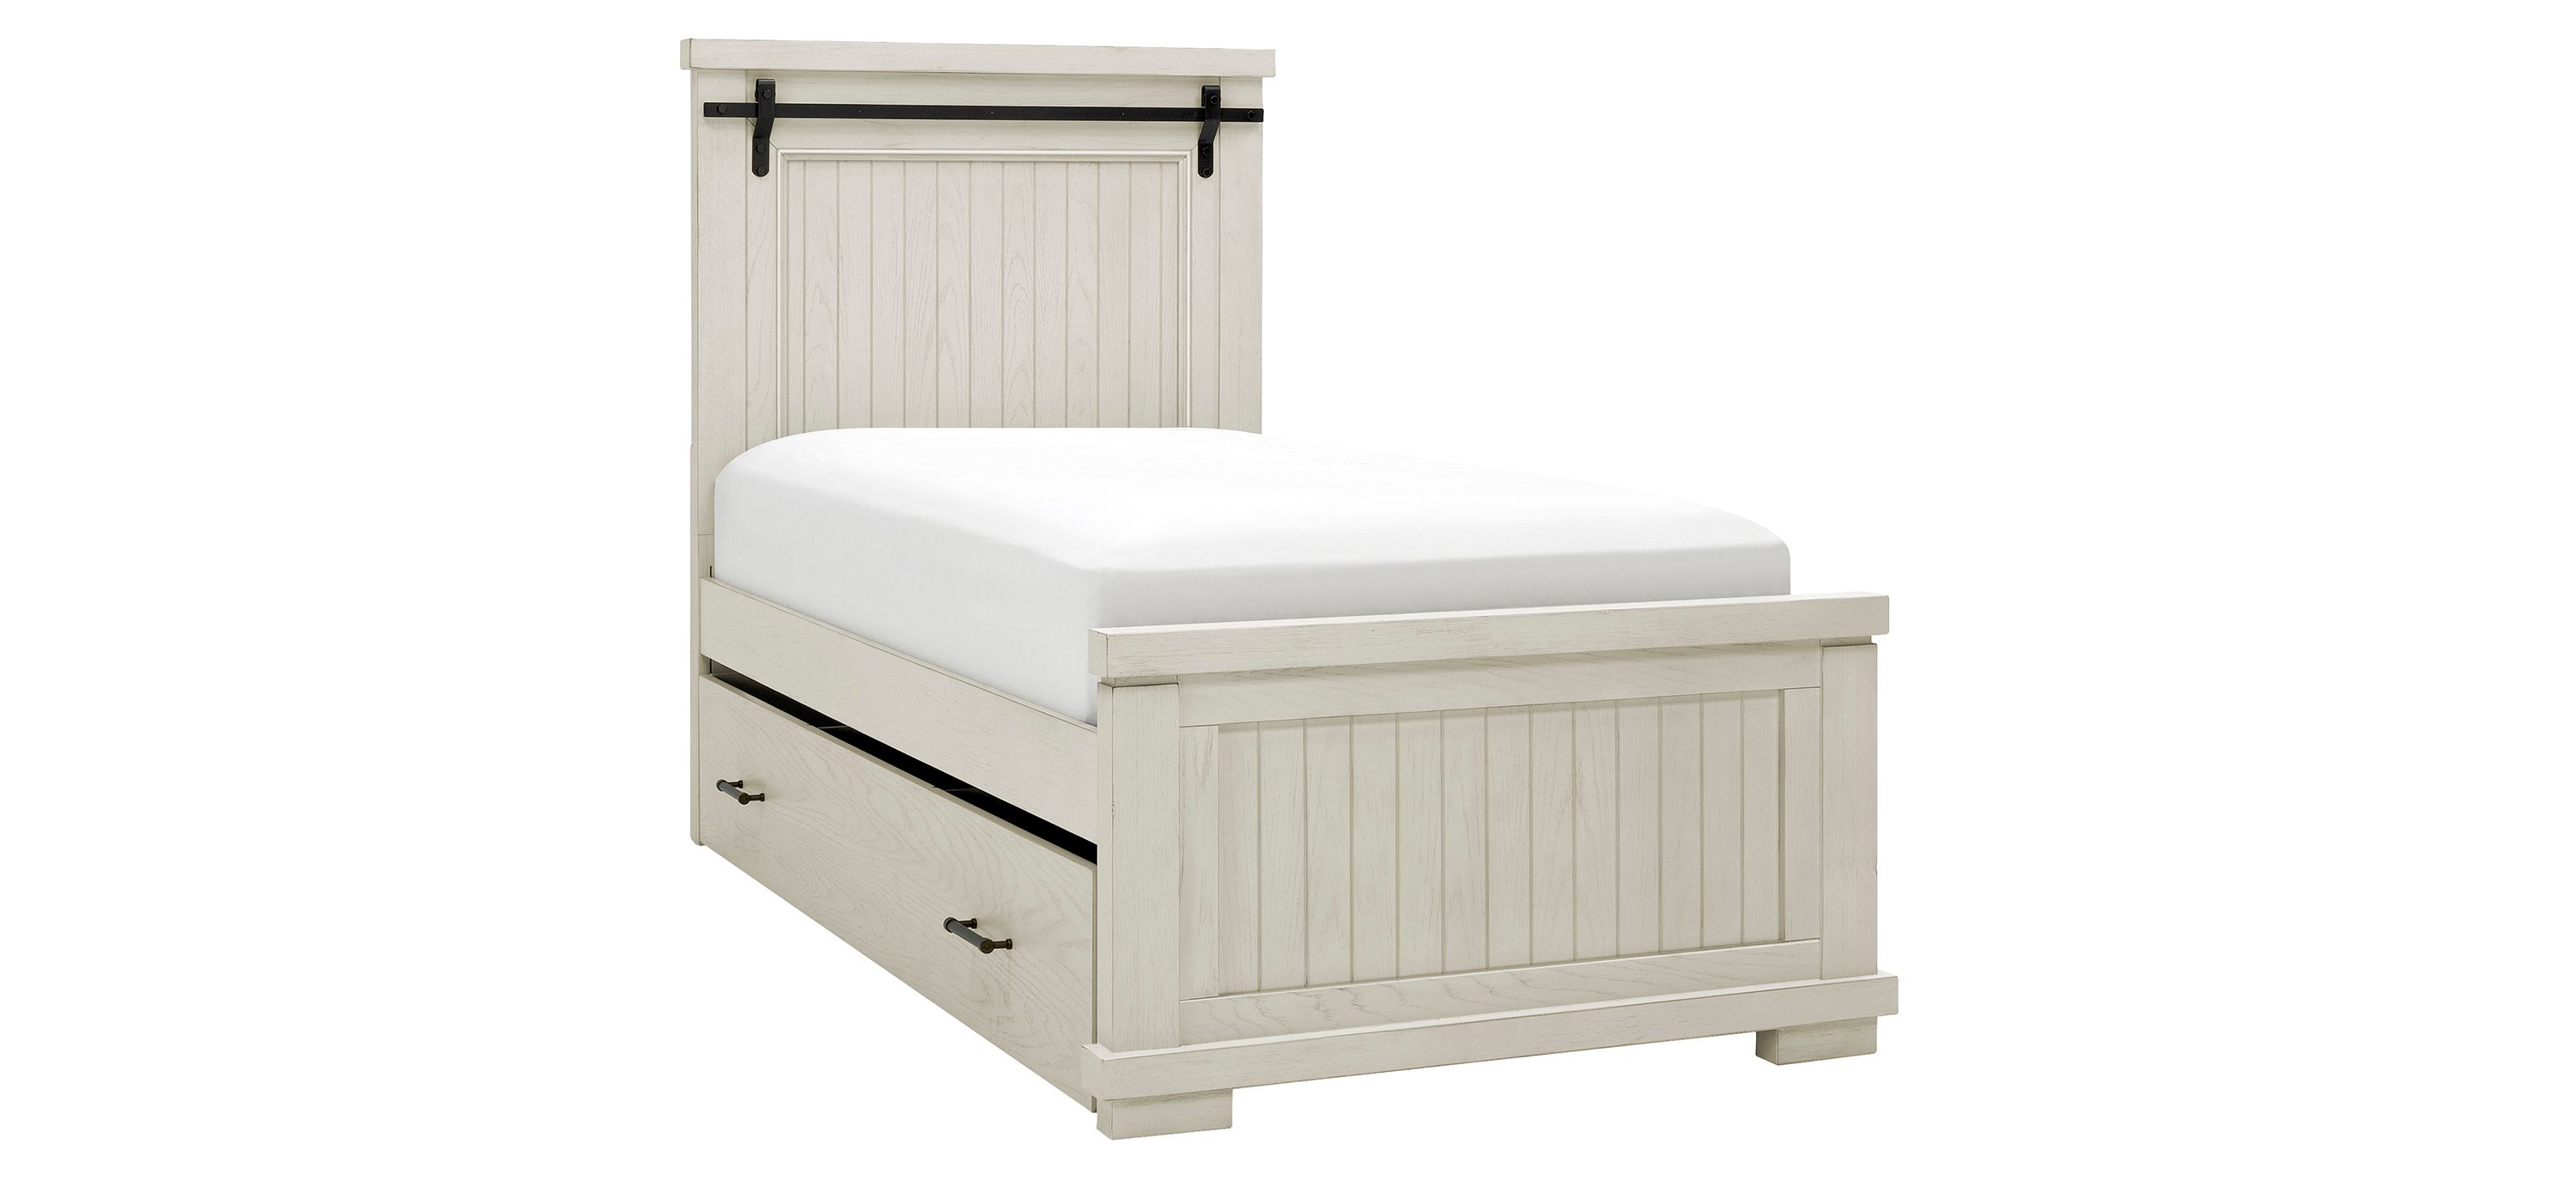 Bexley Panel Bed w/ Trundle